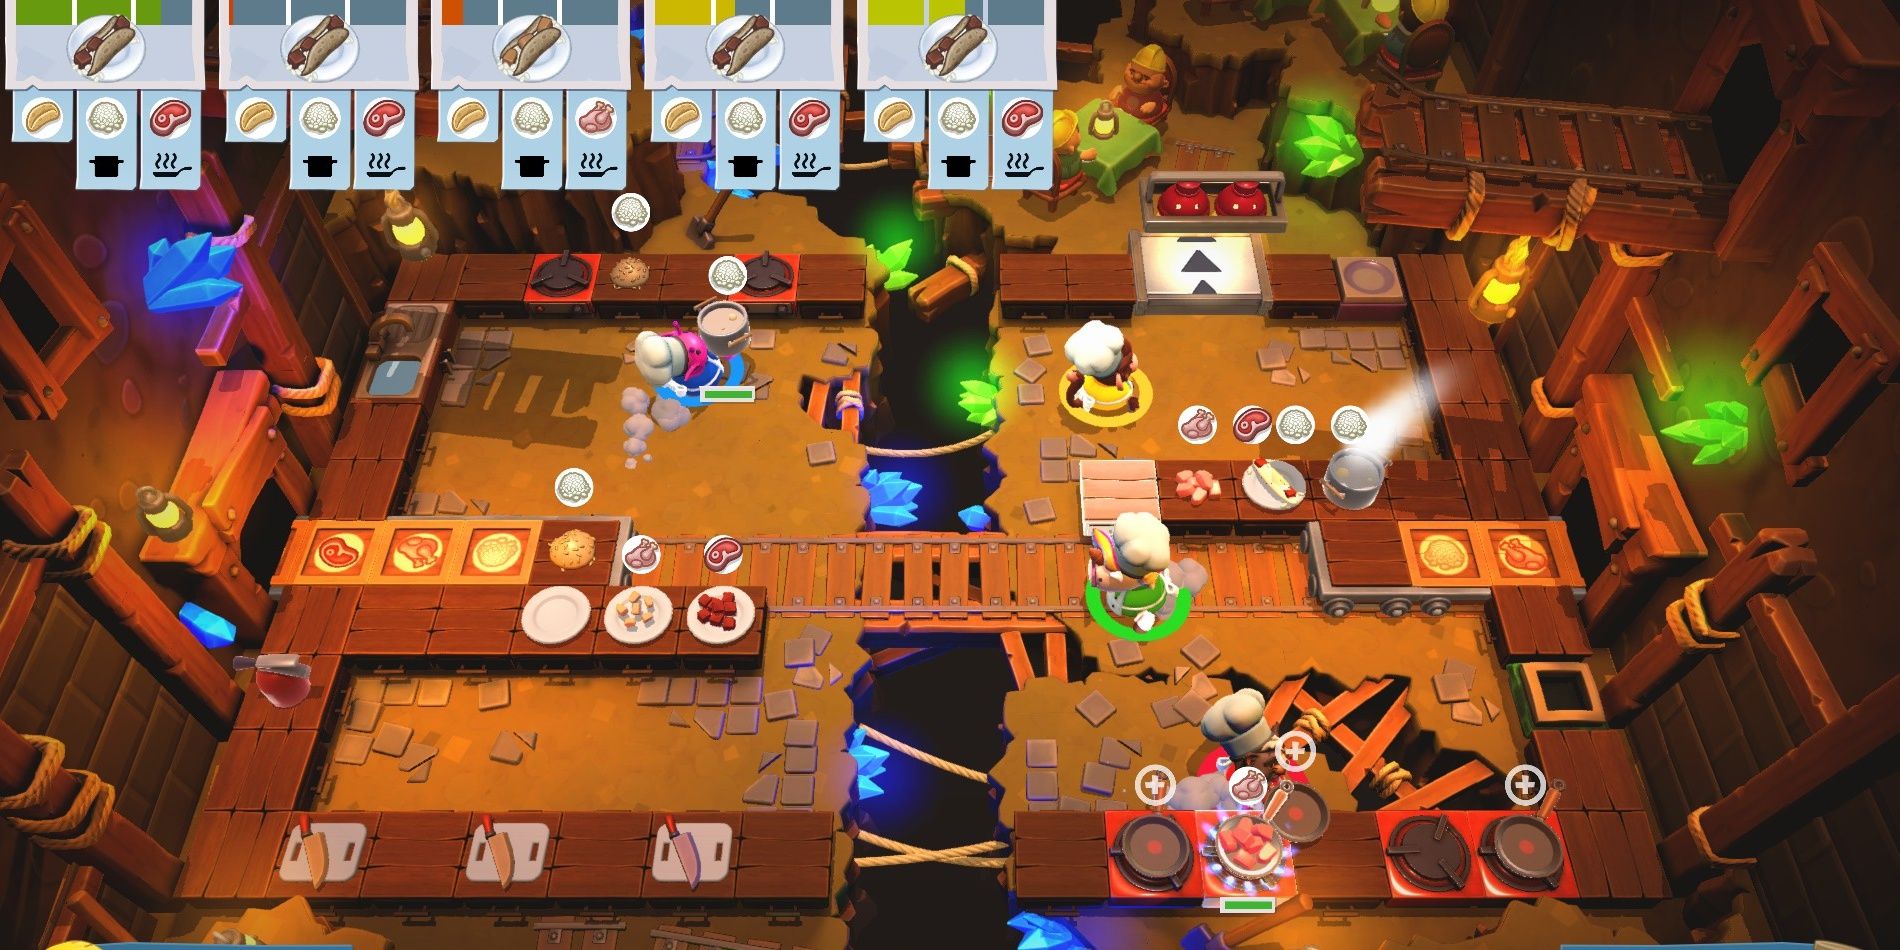 How To Crossplay Overcooked 2 PS4 and PC [Very EASY!] 